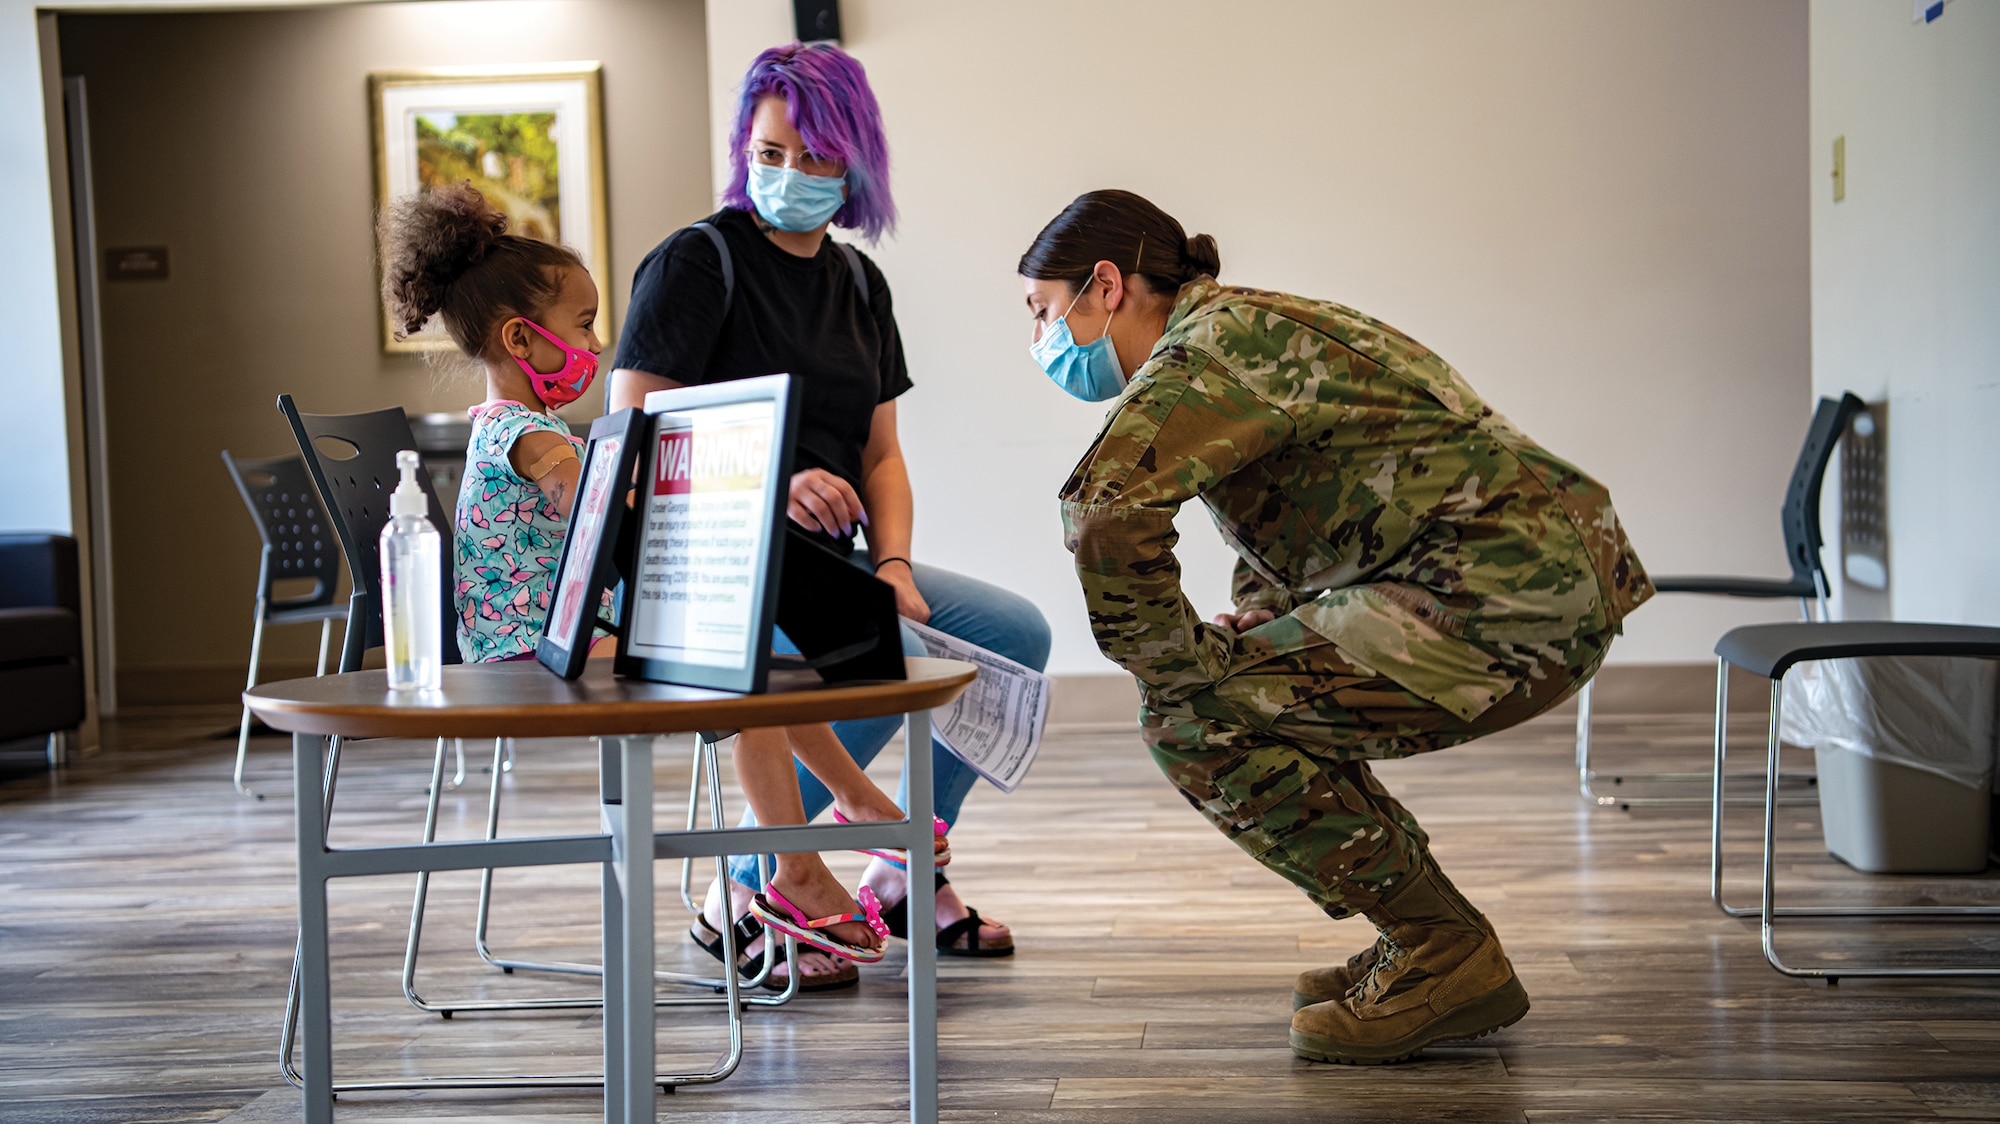 Tech. Sgt. Caitlin Donnelly, 445th Aeromedical Staging Squadron medical technician, talks to a young patient prior to receiving care at Hancock County Health Department, Hancock, Georgia, June 10, 2021.